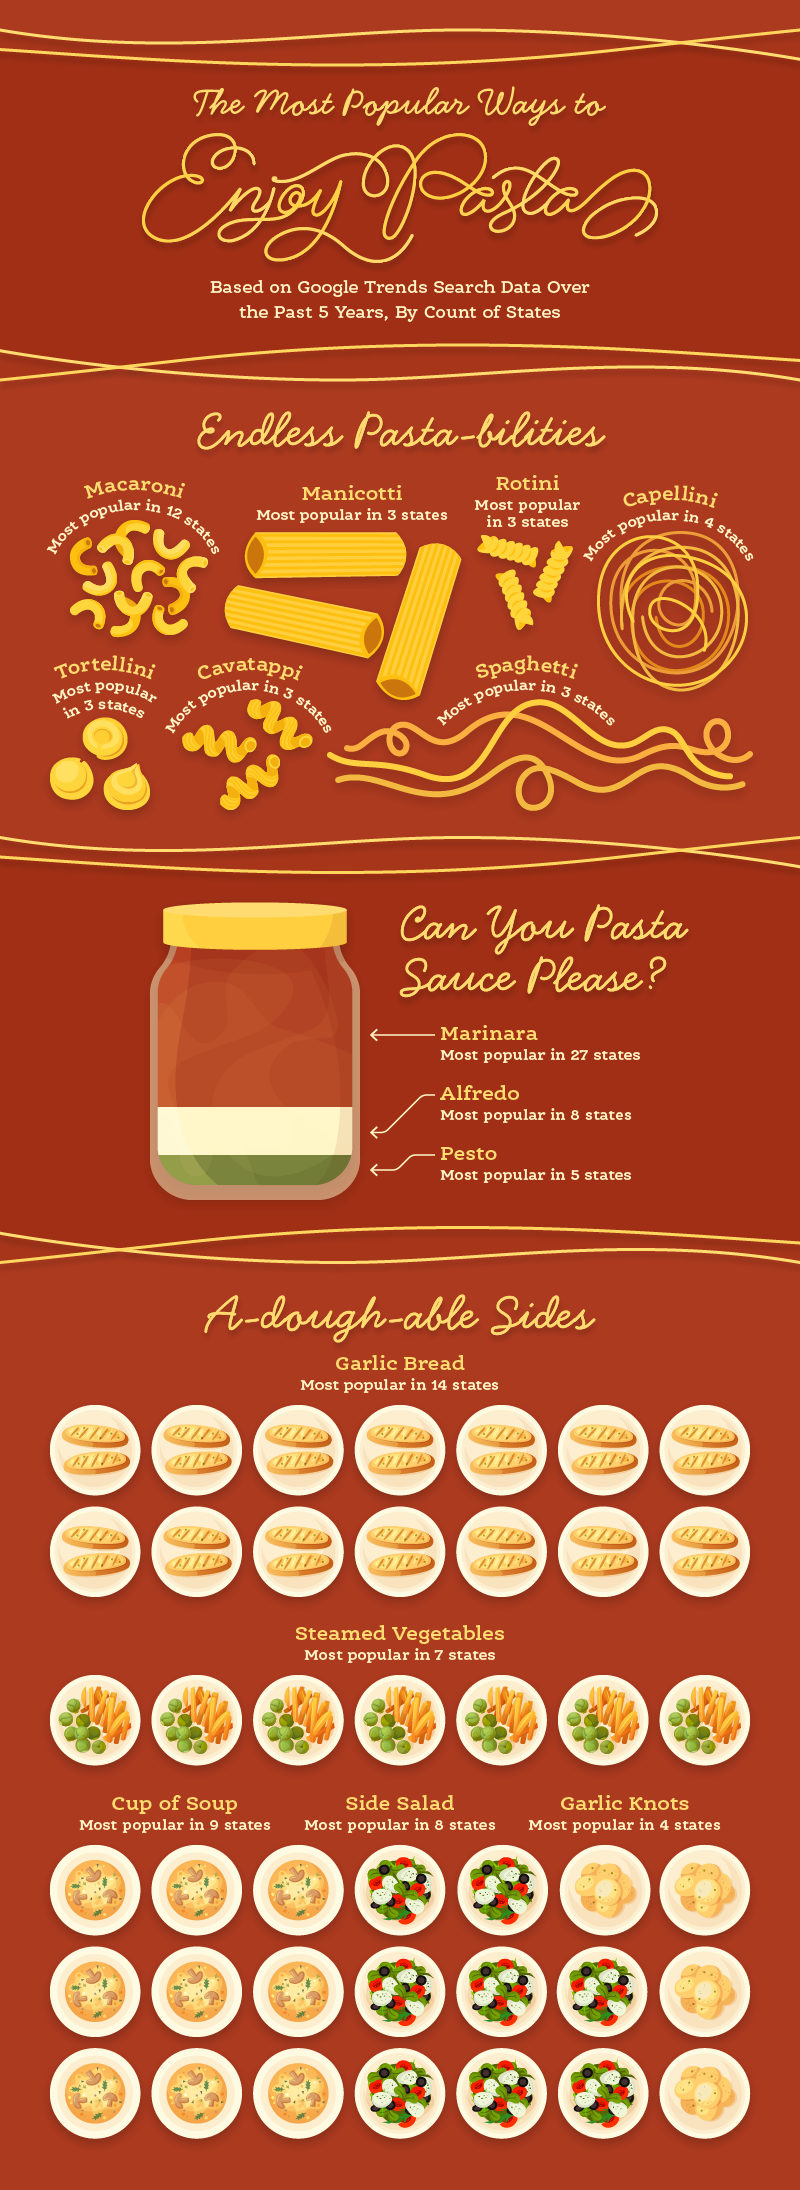 Graphic depicting the most popular noodles, sauces and side dishes